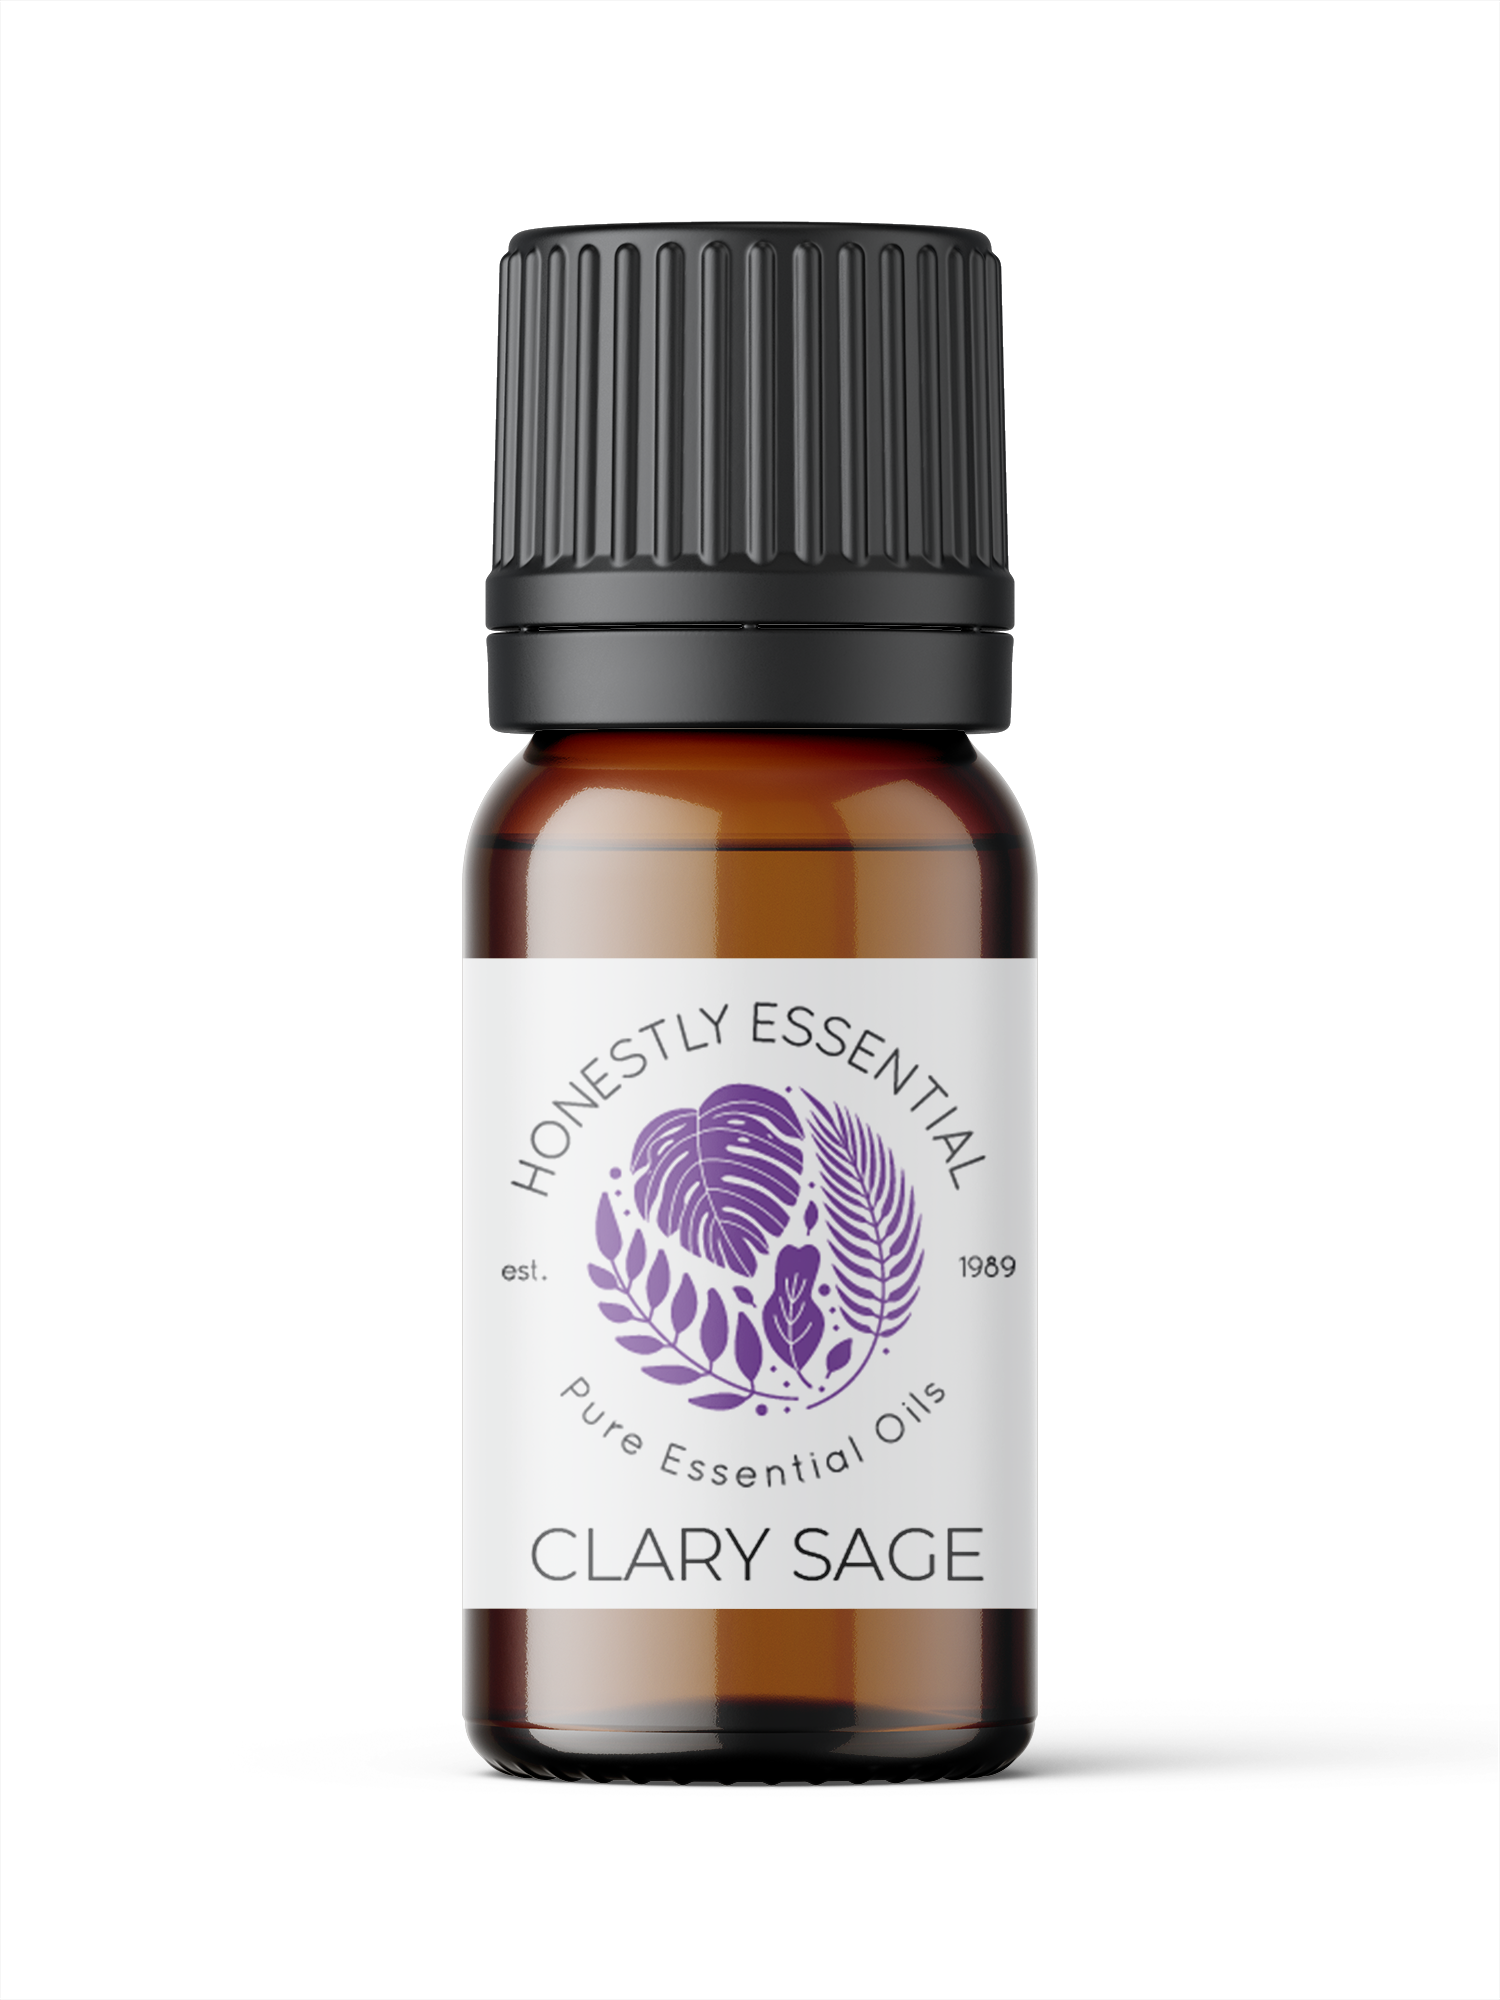 Clary Sage Essential Oil - Essential Oils | Honestly Essential Oils anxiety, depression, herb, herb essential oil, herbs, pain, pain reliever, relaxation, relaxation and sleep, sleep